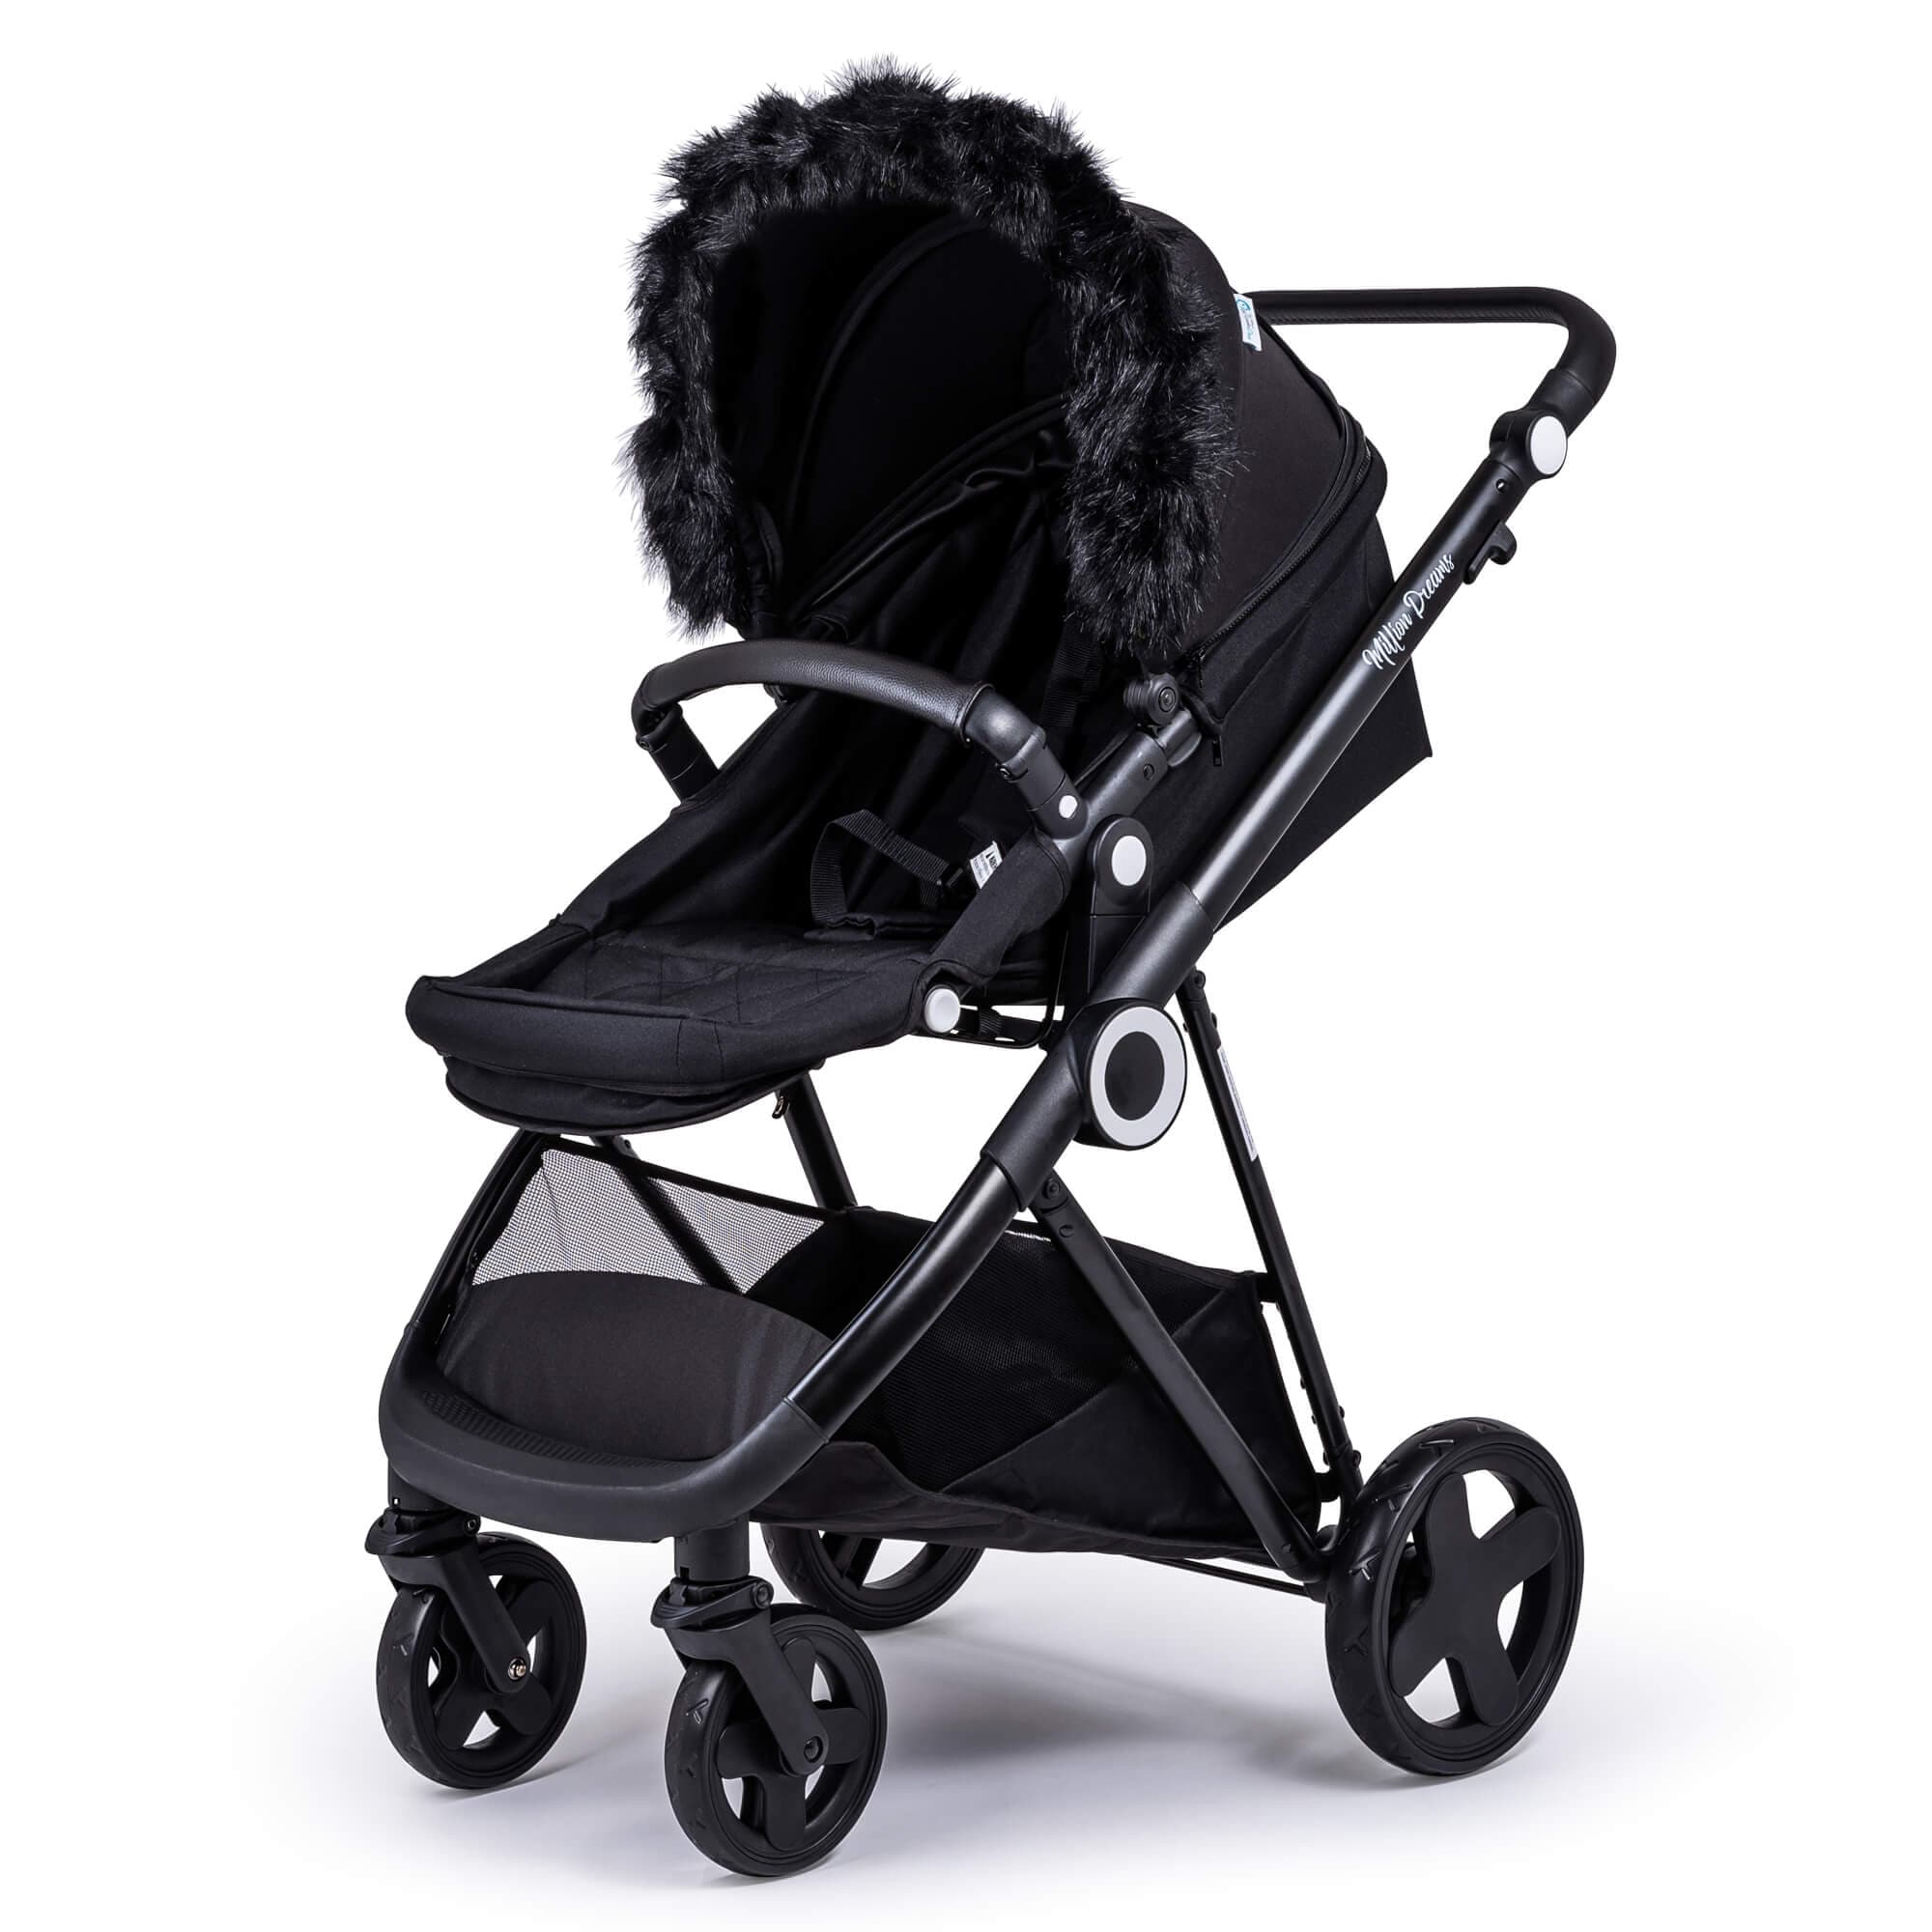 Pram Fur Hood Trim Attachment for Pushchair Compatible with Bugaboo - For Your Little One